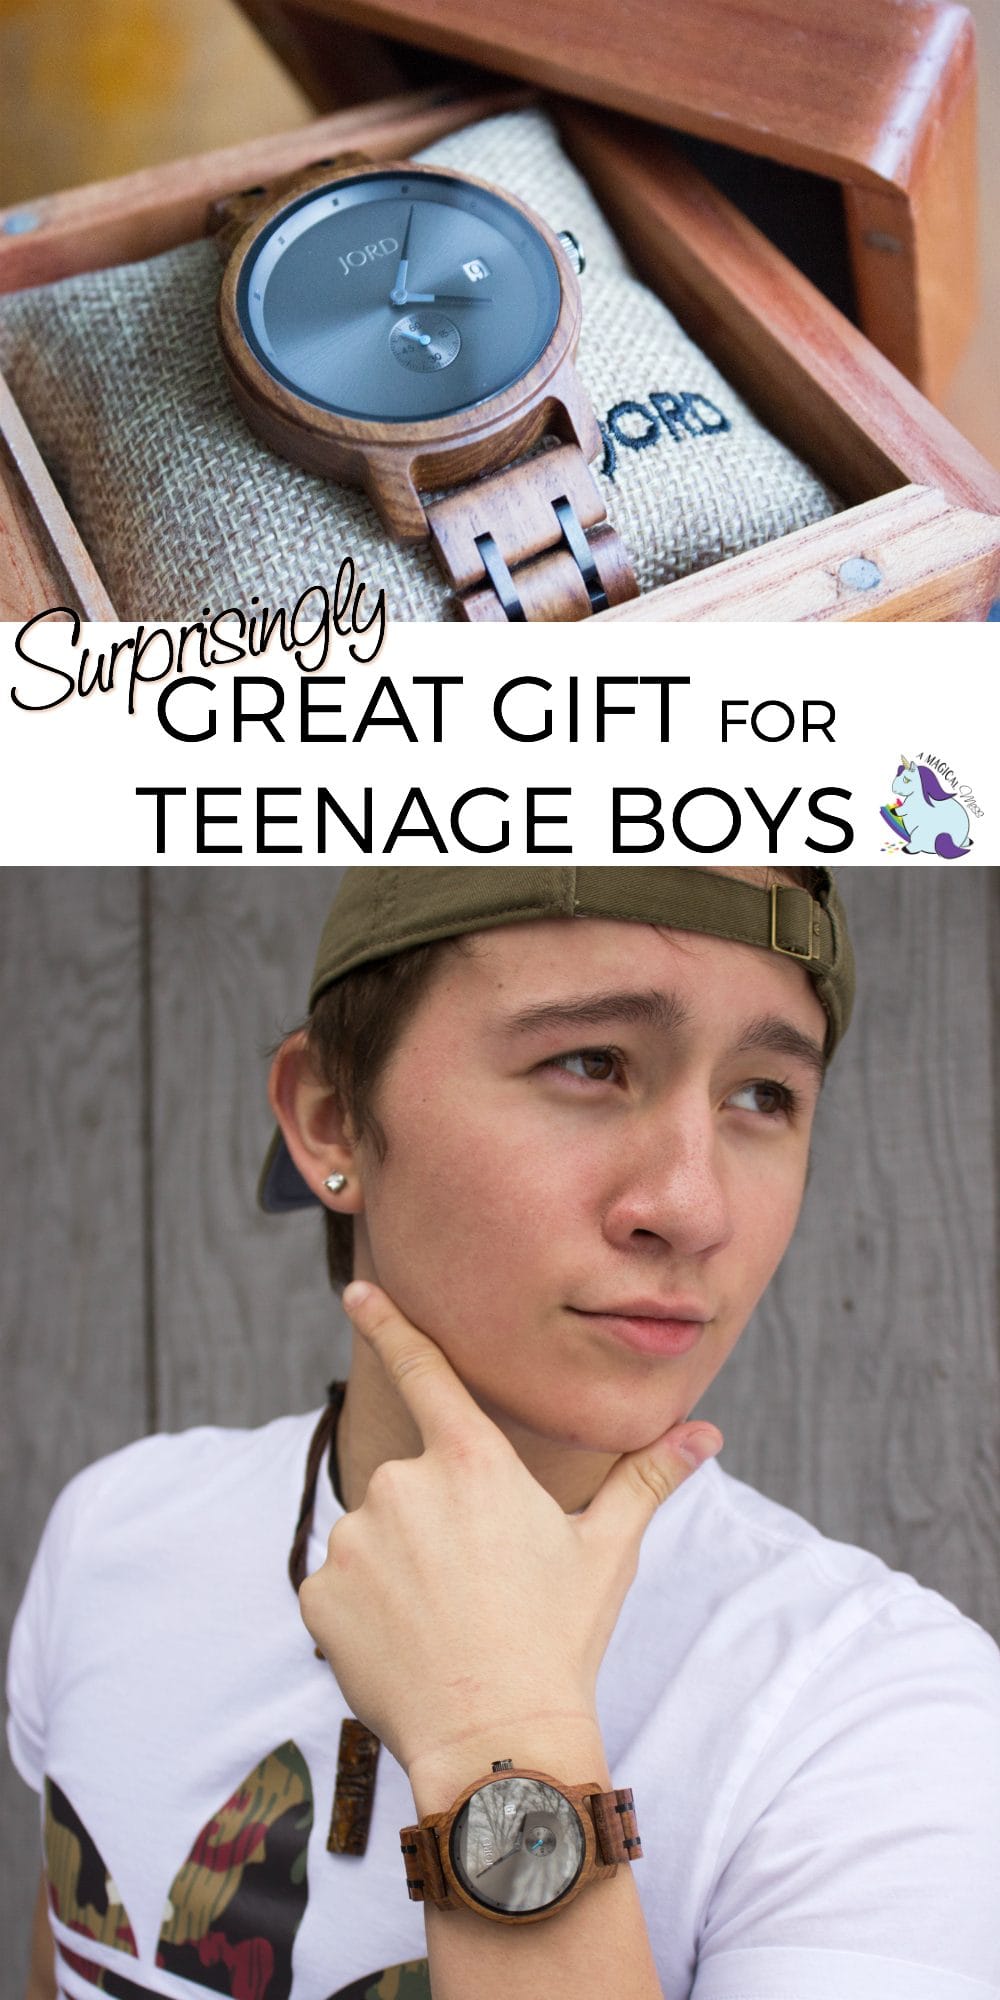 My Teenage Son Won't Stop Talking About JORD Watches - Giveaway #JORDWatches AD